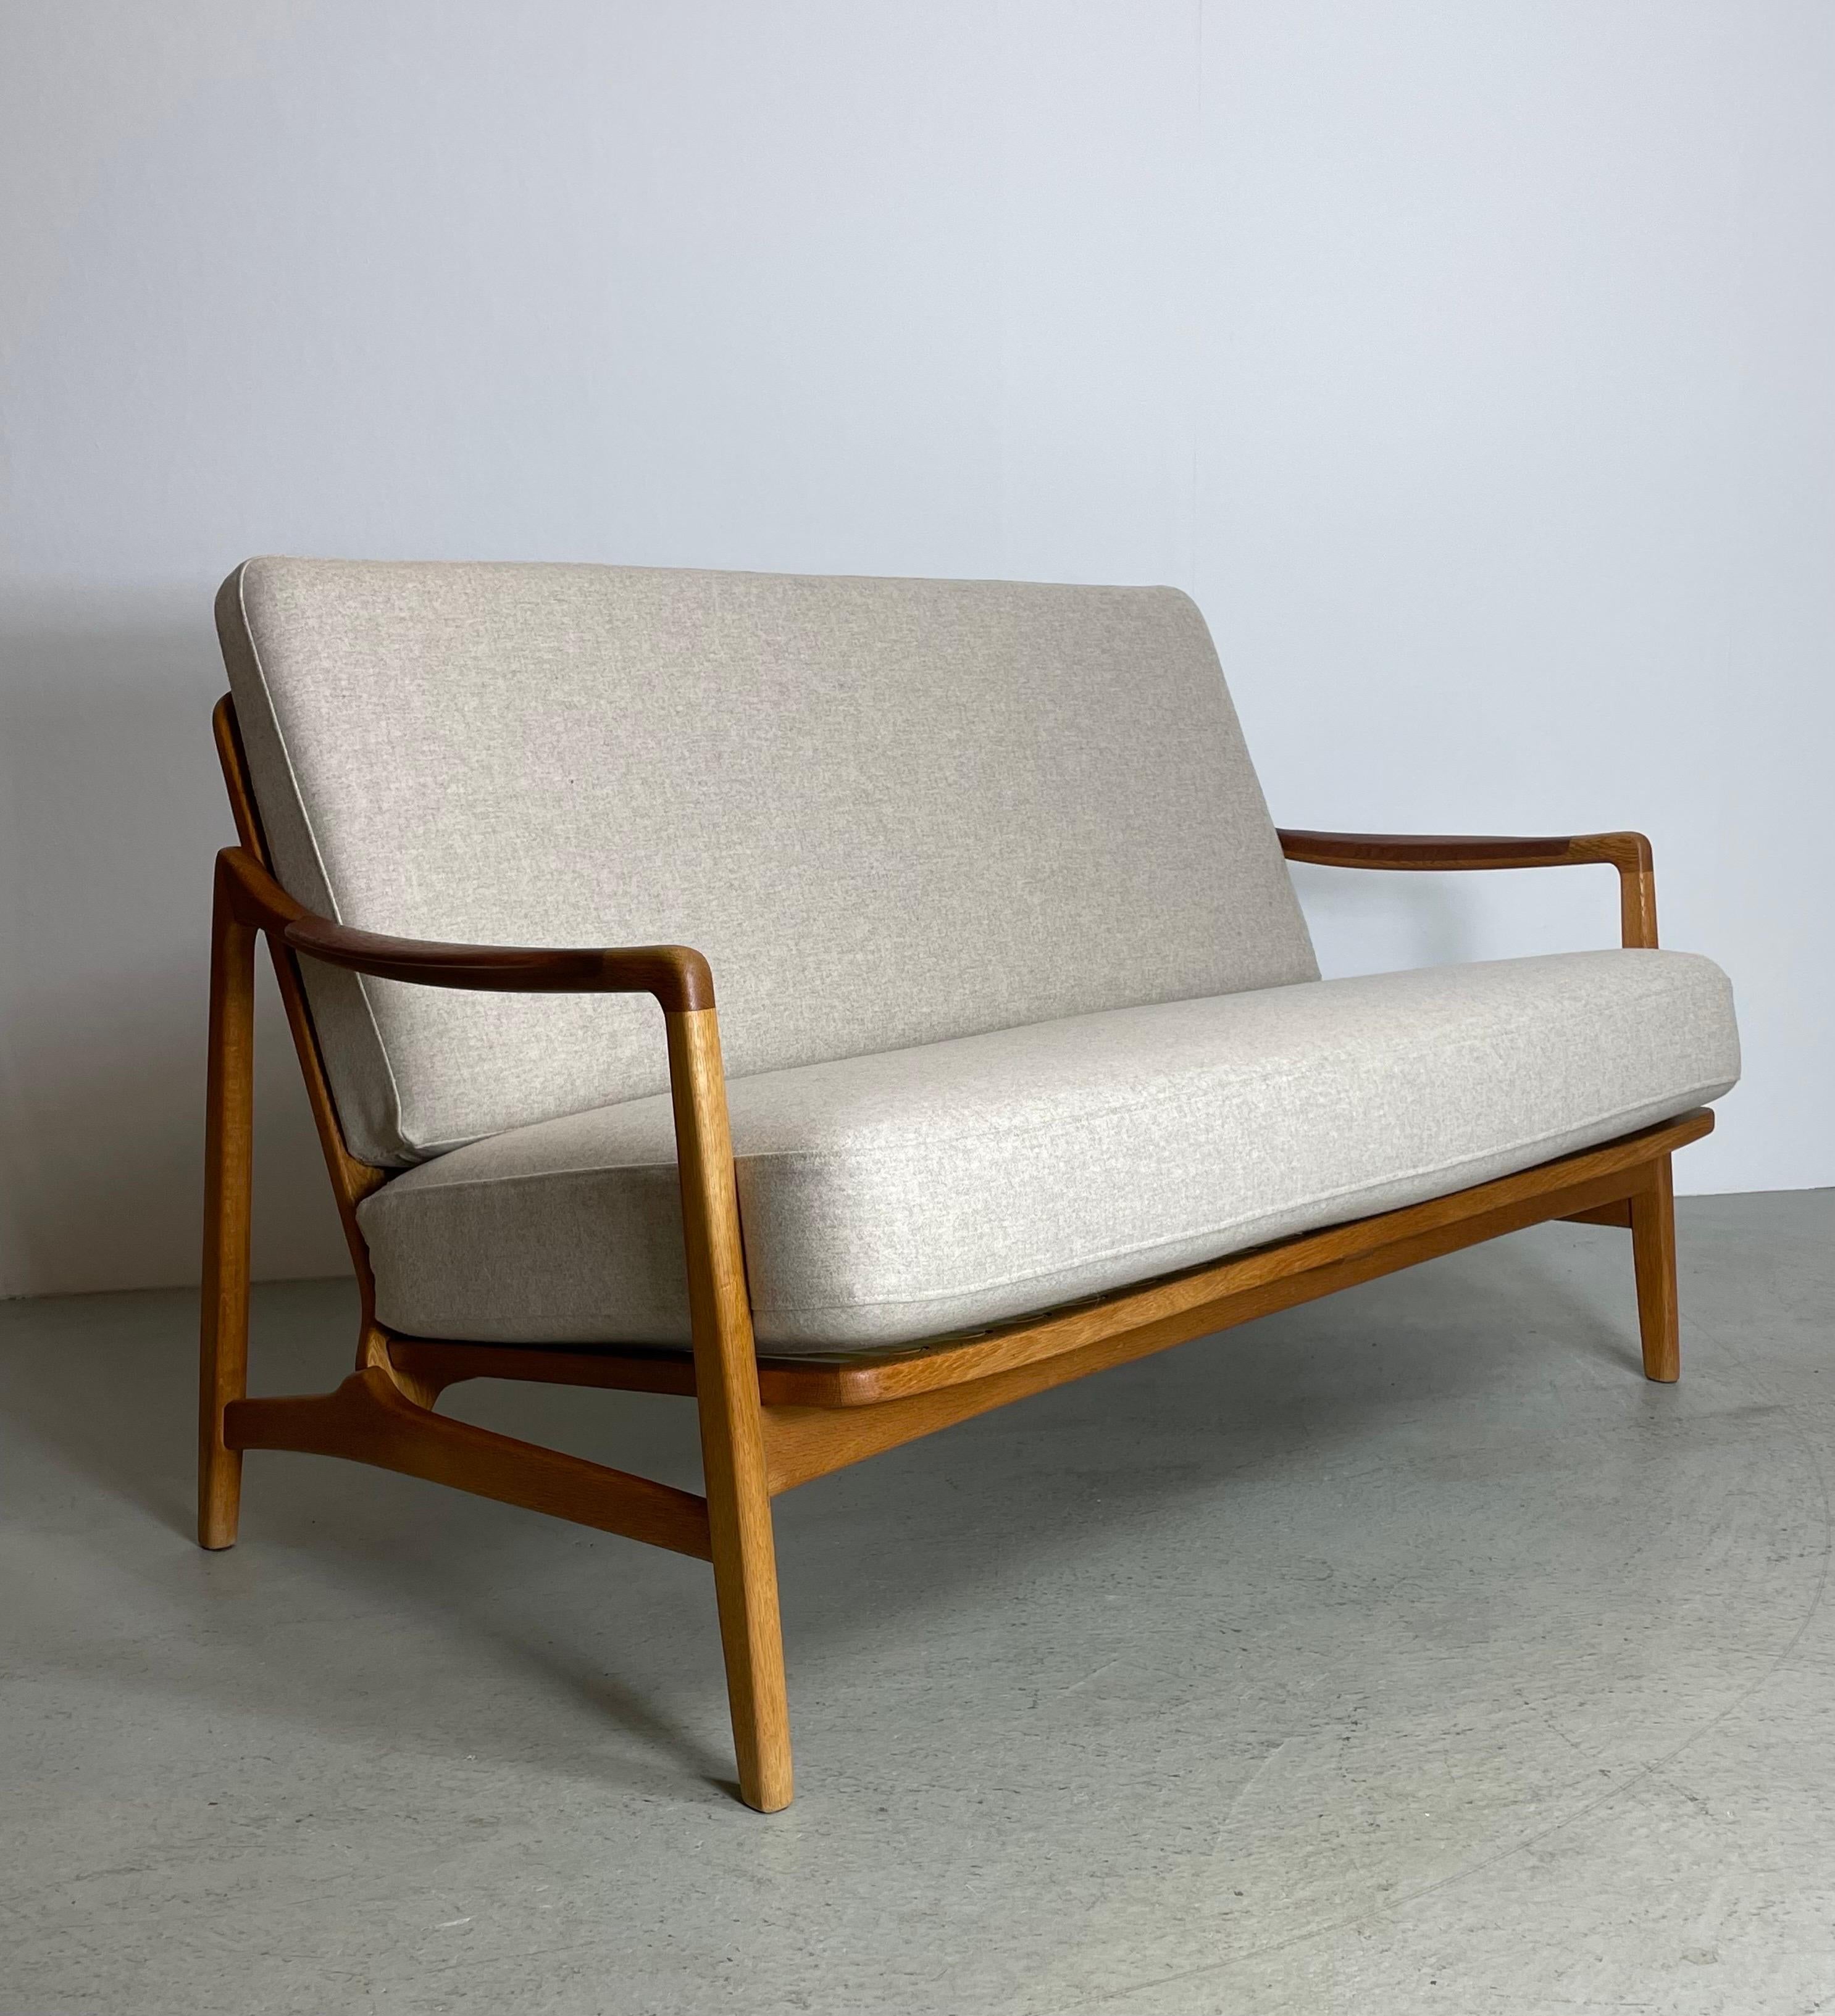  Danish Mid-Century Sofa by Tove & Edward Kindt-Larsen, Denmark 1950s In Good Condition For Sale In St-Brais, JU